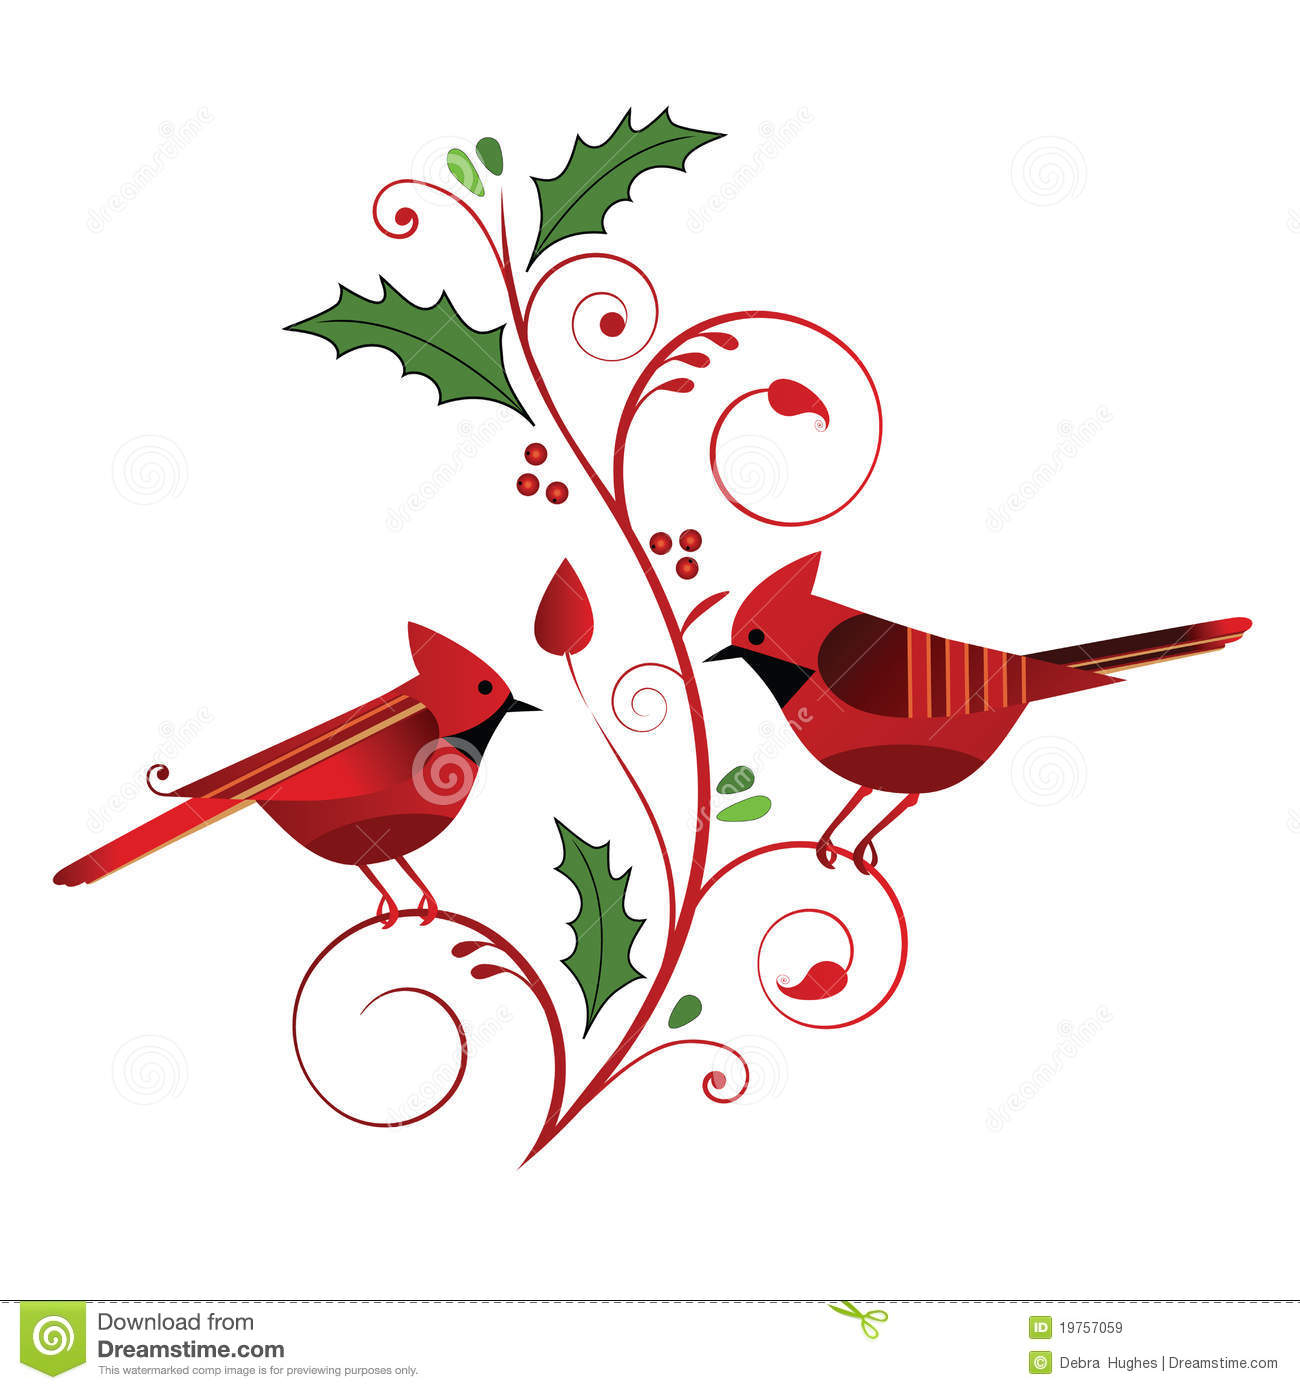 Red Cardinals And Christmas Flourish Royalty Free Stock Images   Image